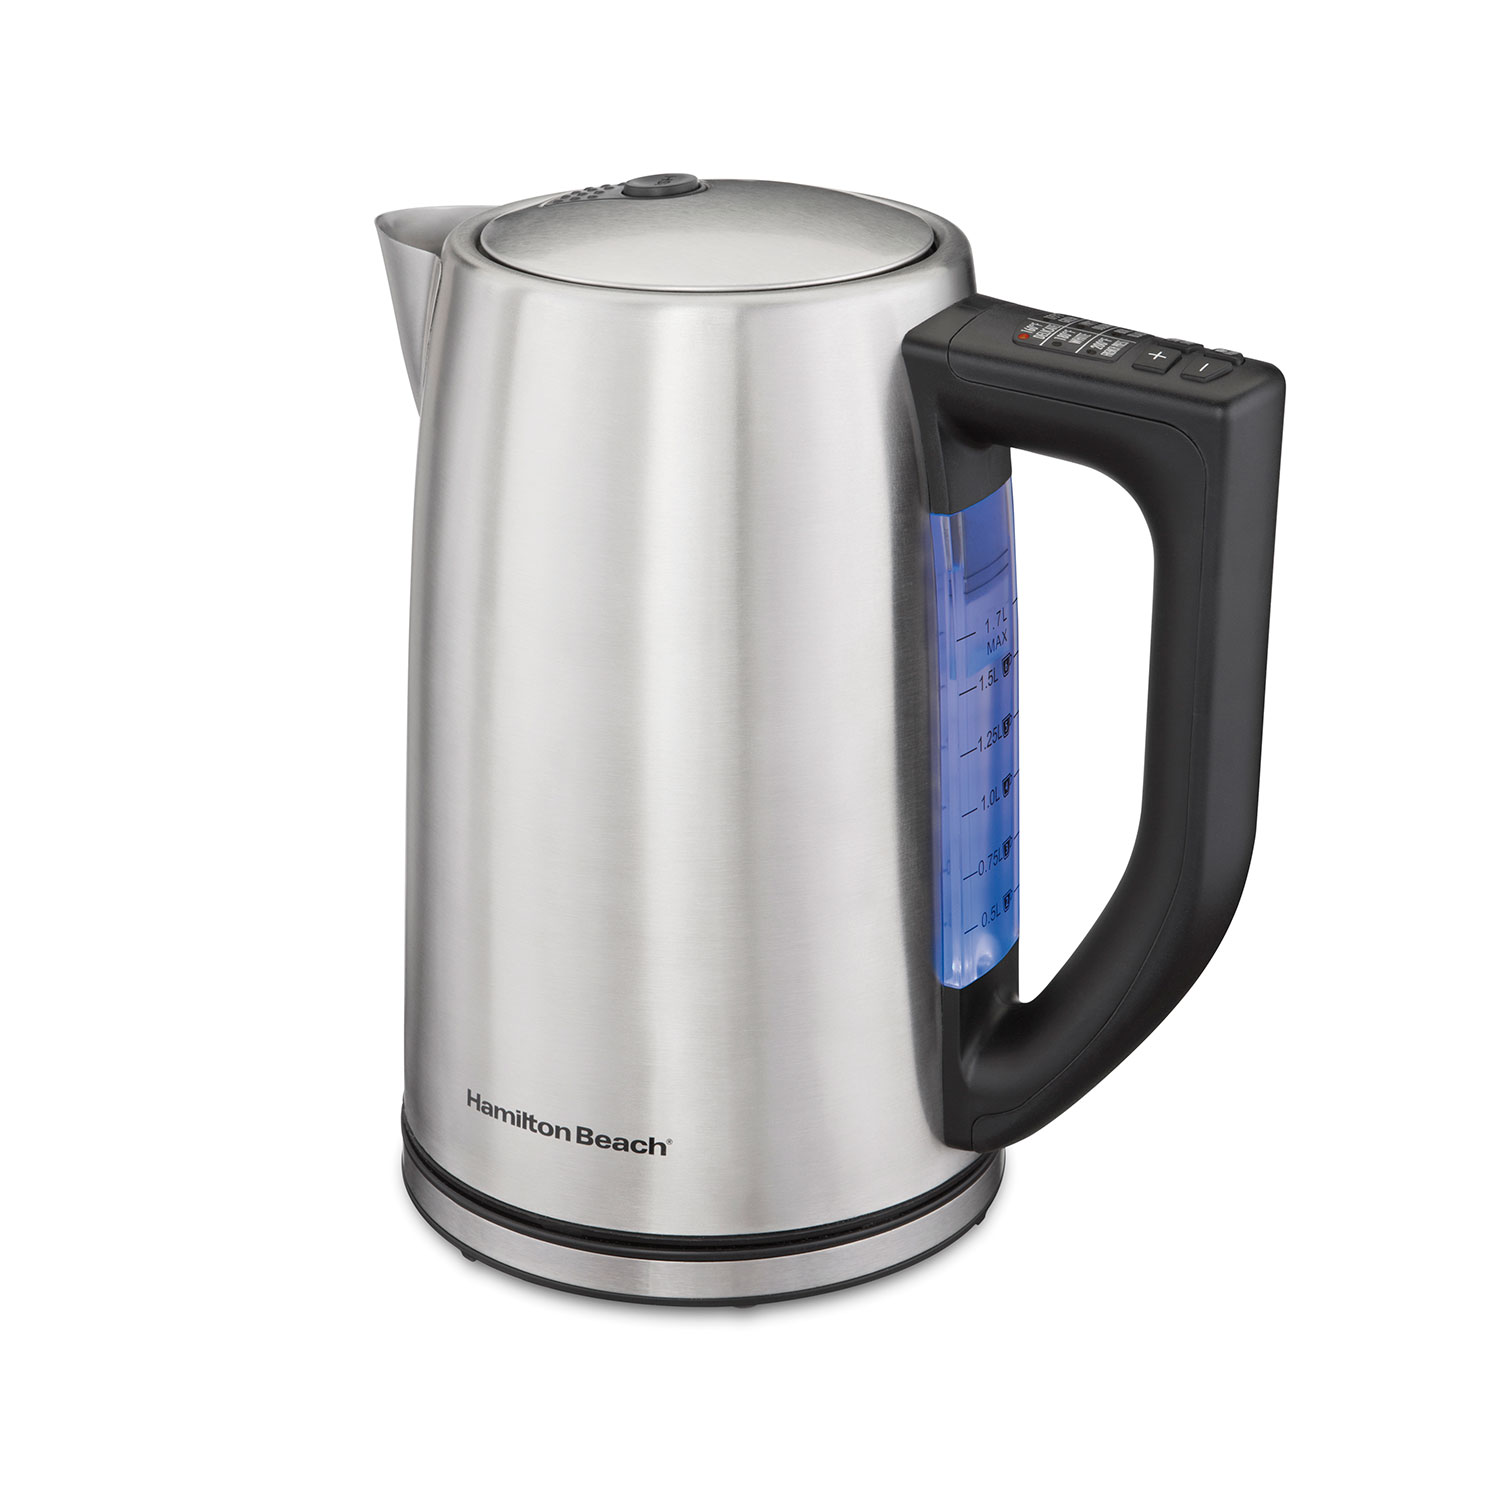 Brushed Stainless 1.7 Liter Variable Temperature Kettle (41025)